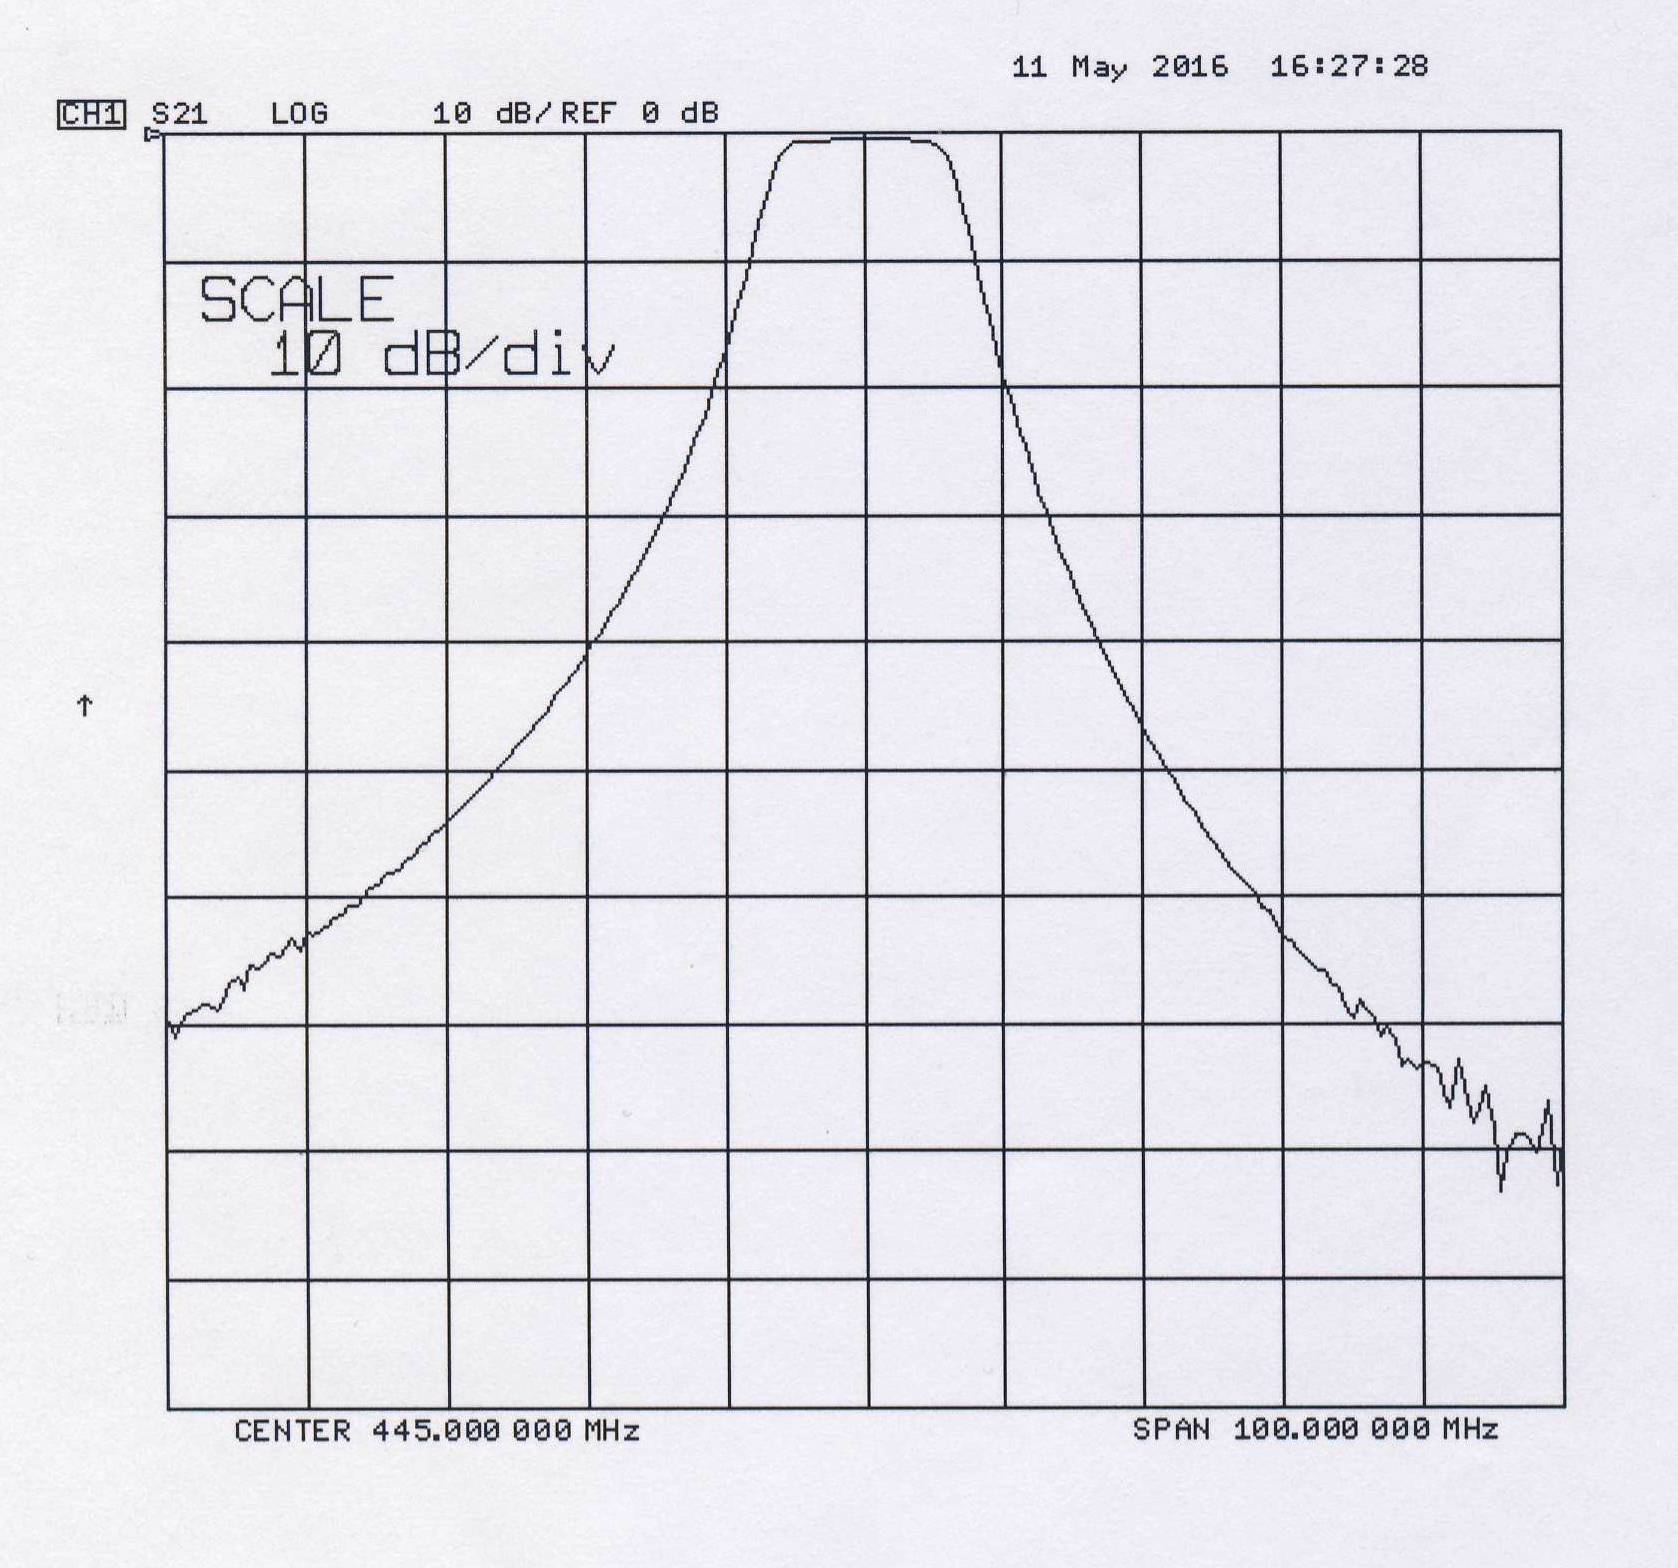 445 Mhz 10Mhz rejection graphc